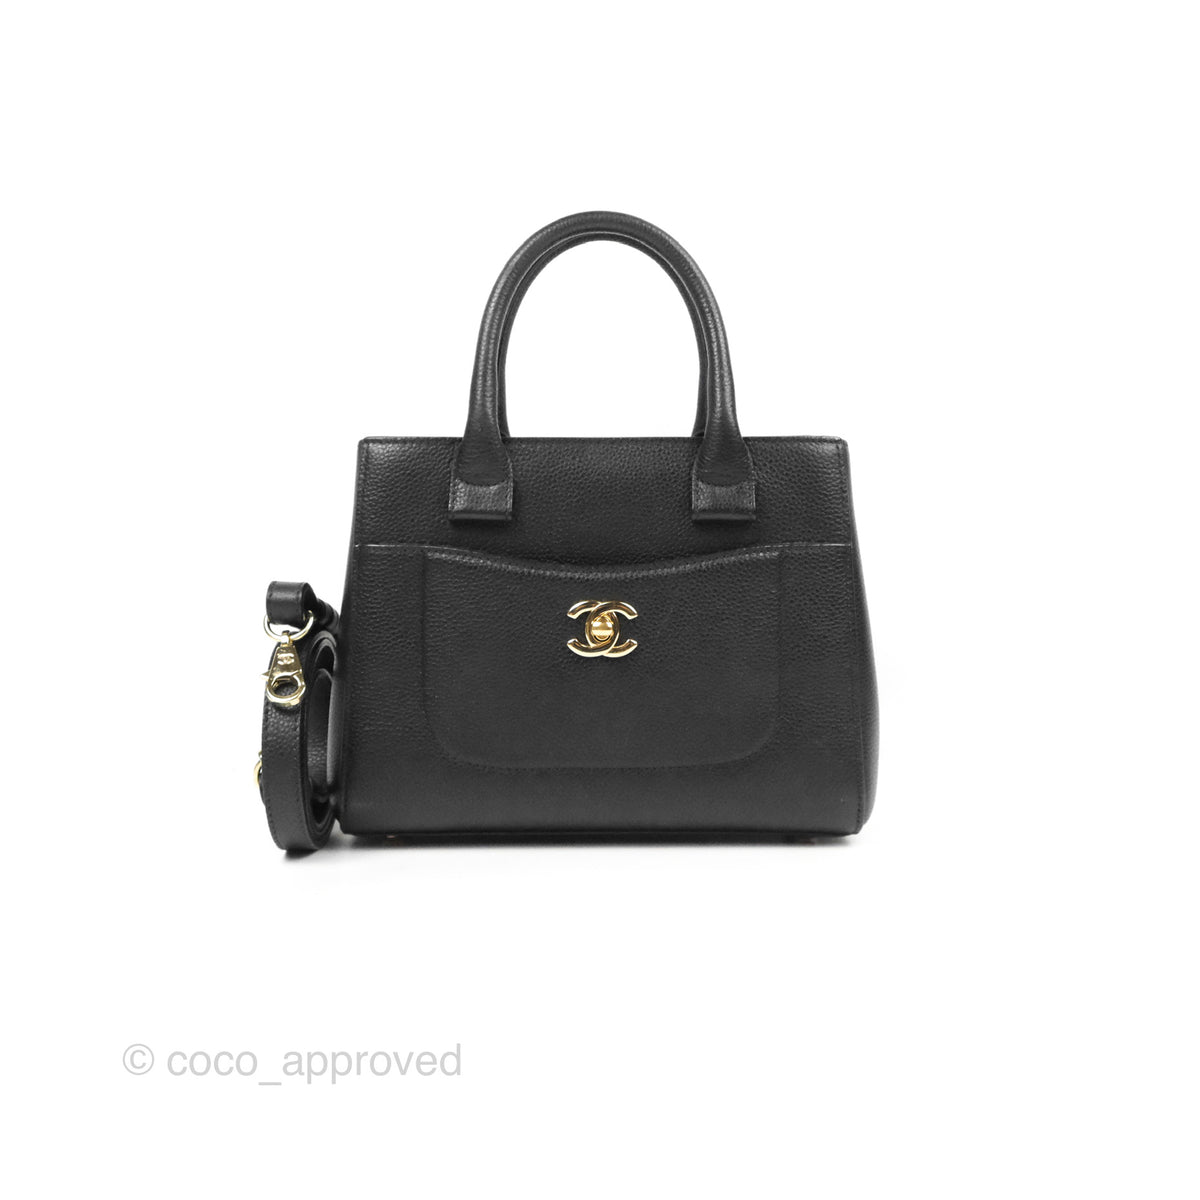 Chanel Black And White Grained Calfskin Neo Executive Medium Tote